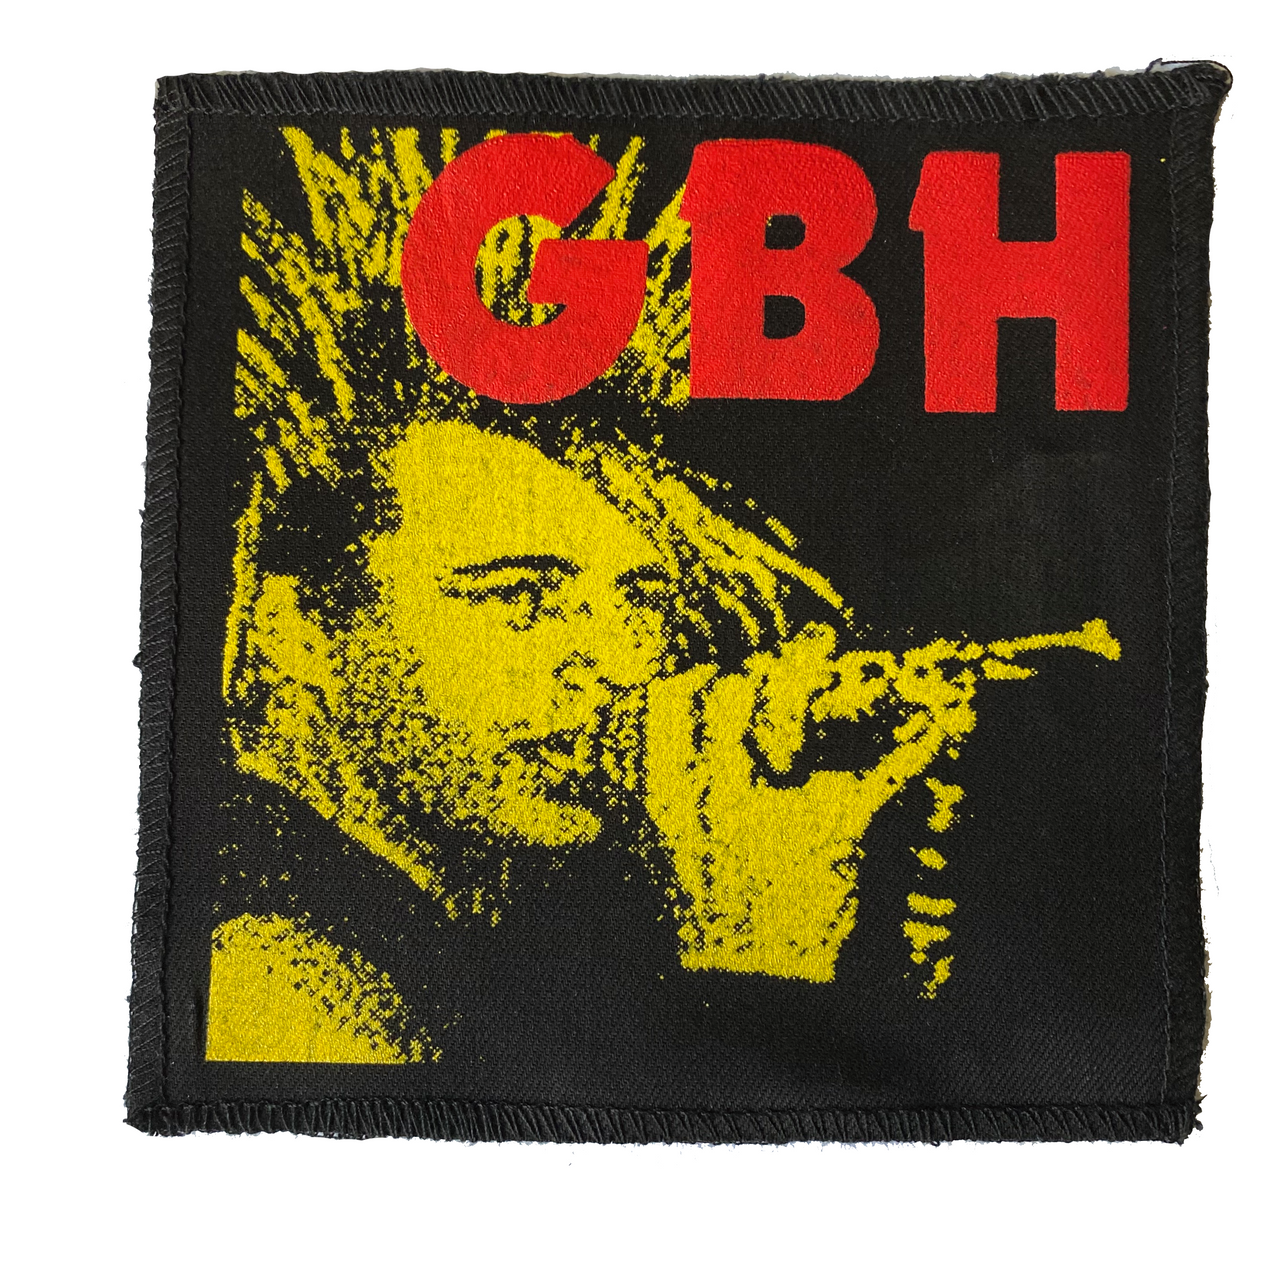 GBH Live Cloth Patch